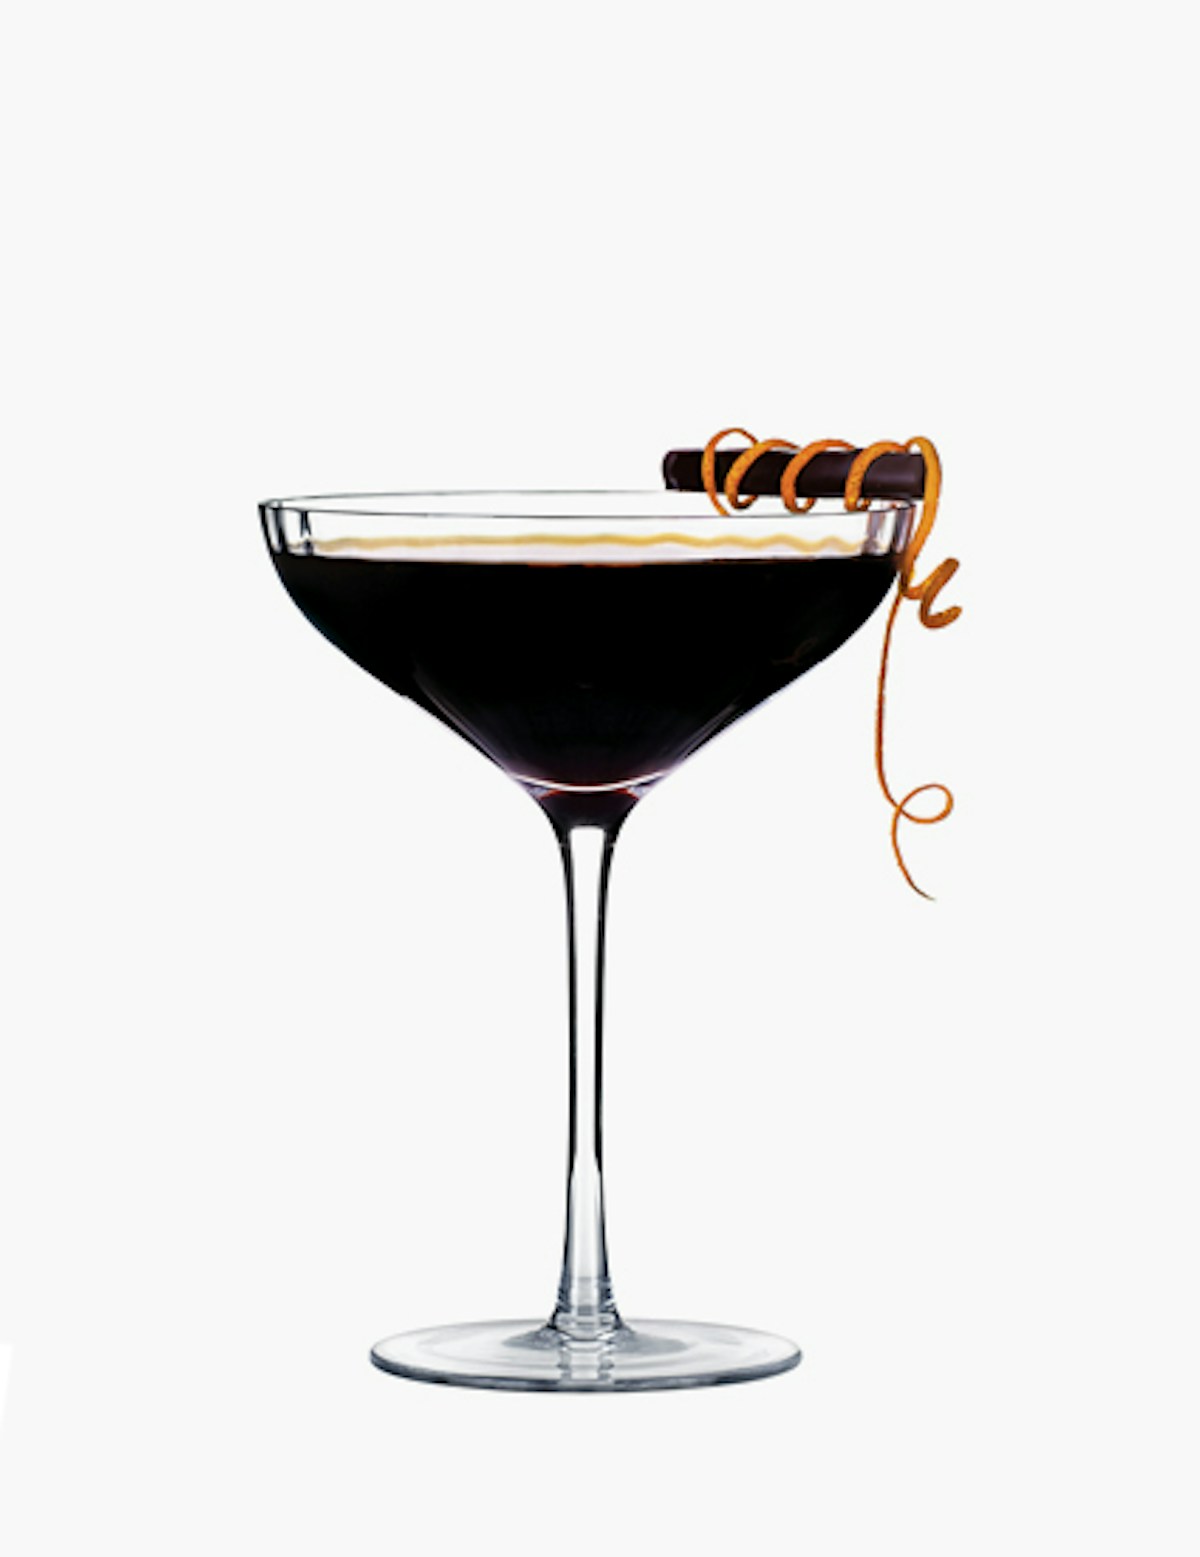 Coffee Cocktail Recipes – Summer Cocktail Recipes – LuxDeco.com Style Guide – Shop Luxury Glassware at LuxDeco.com